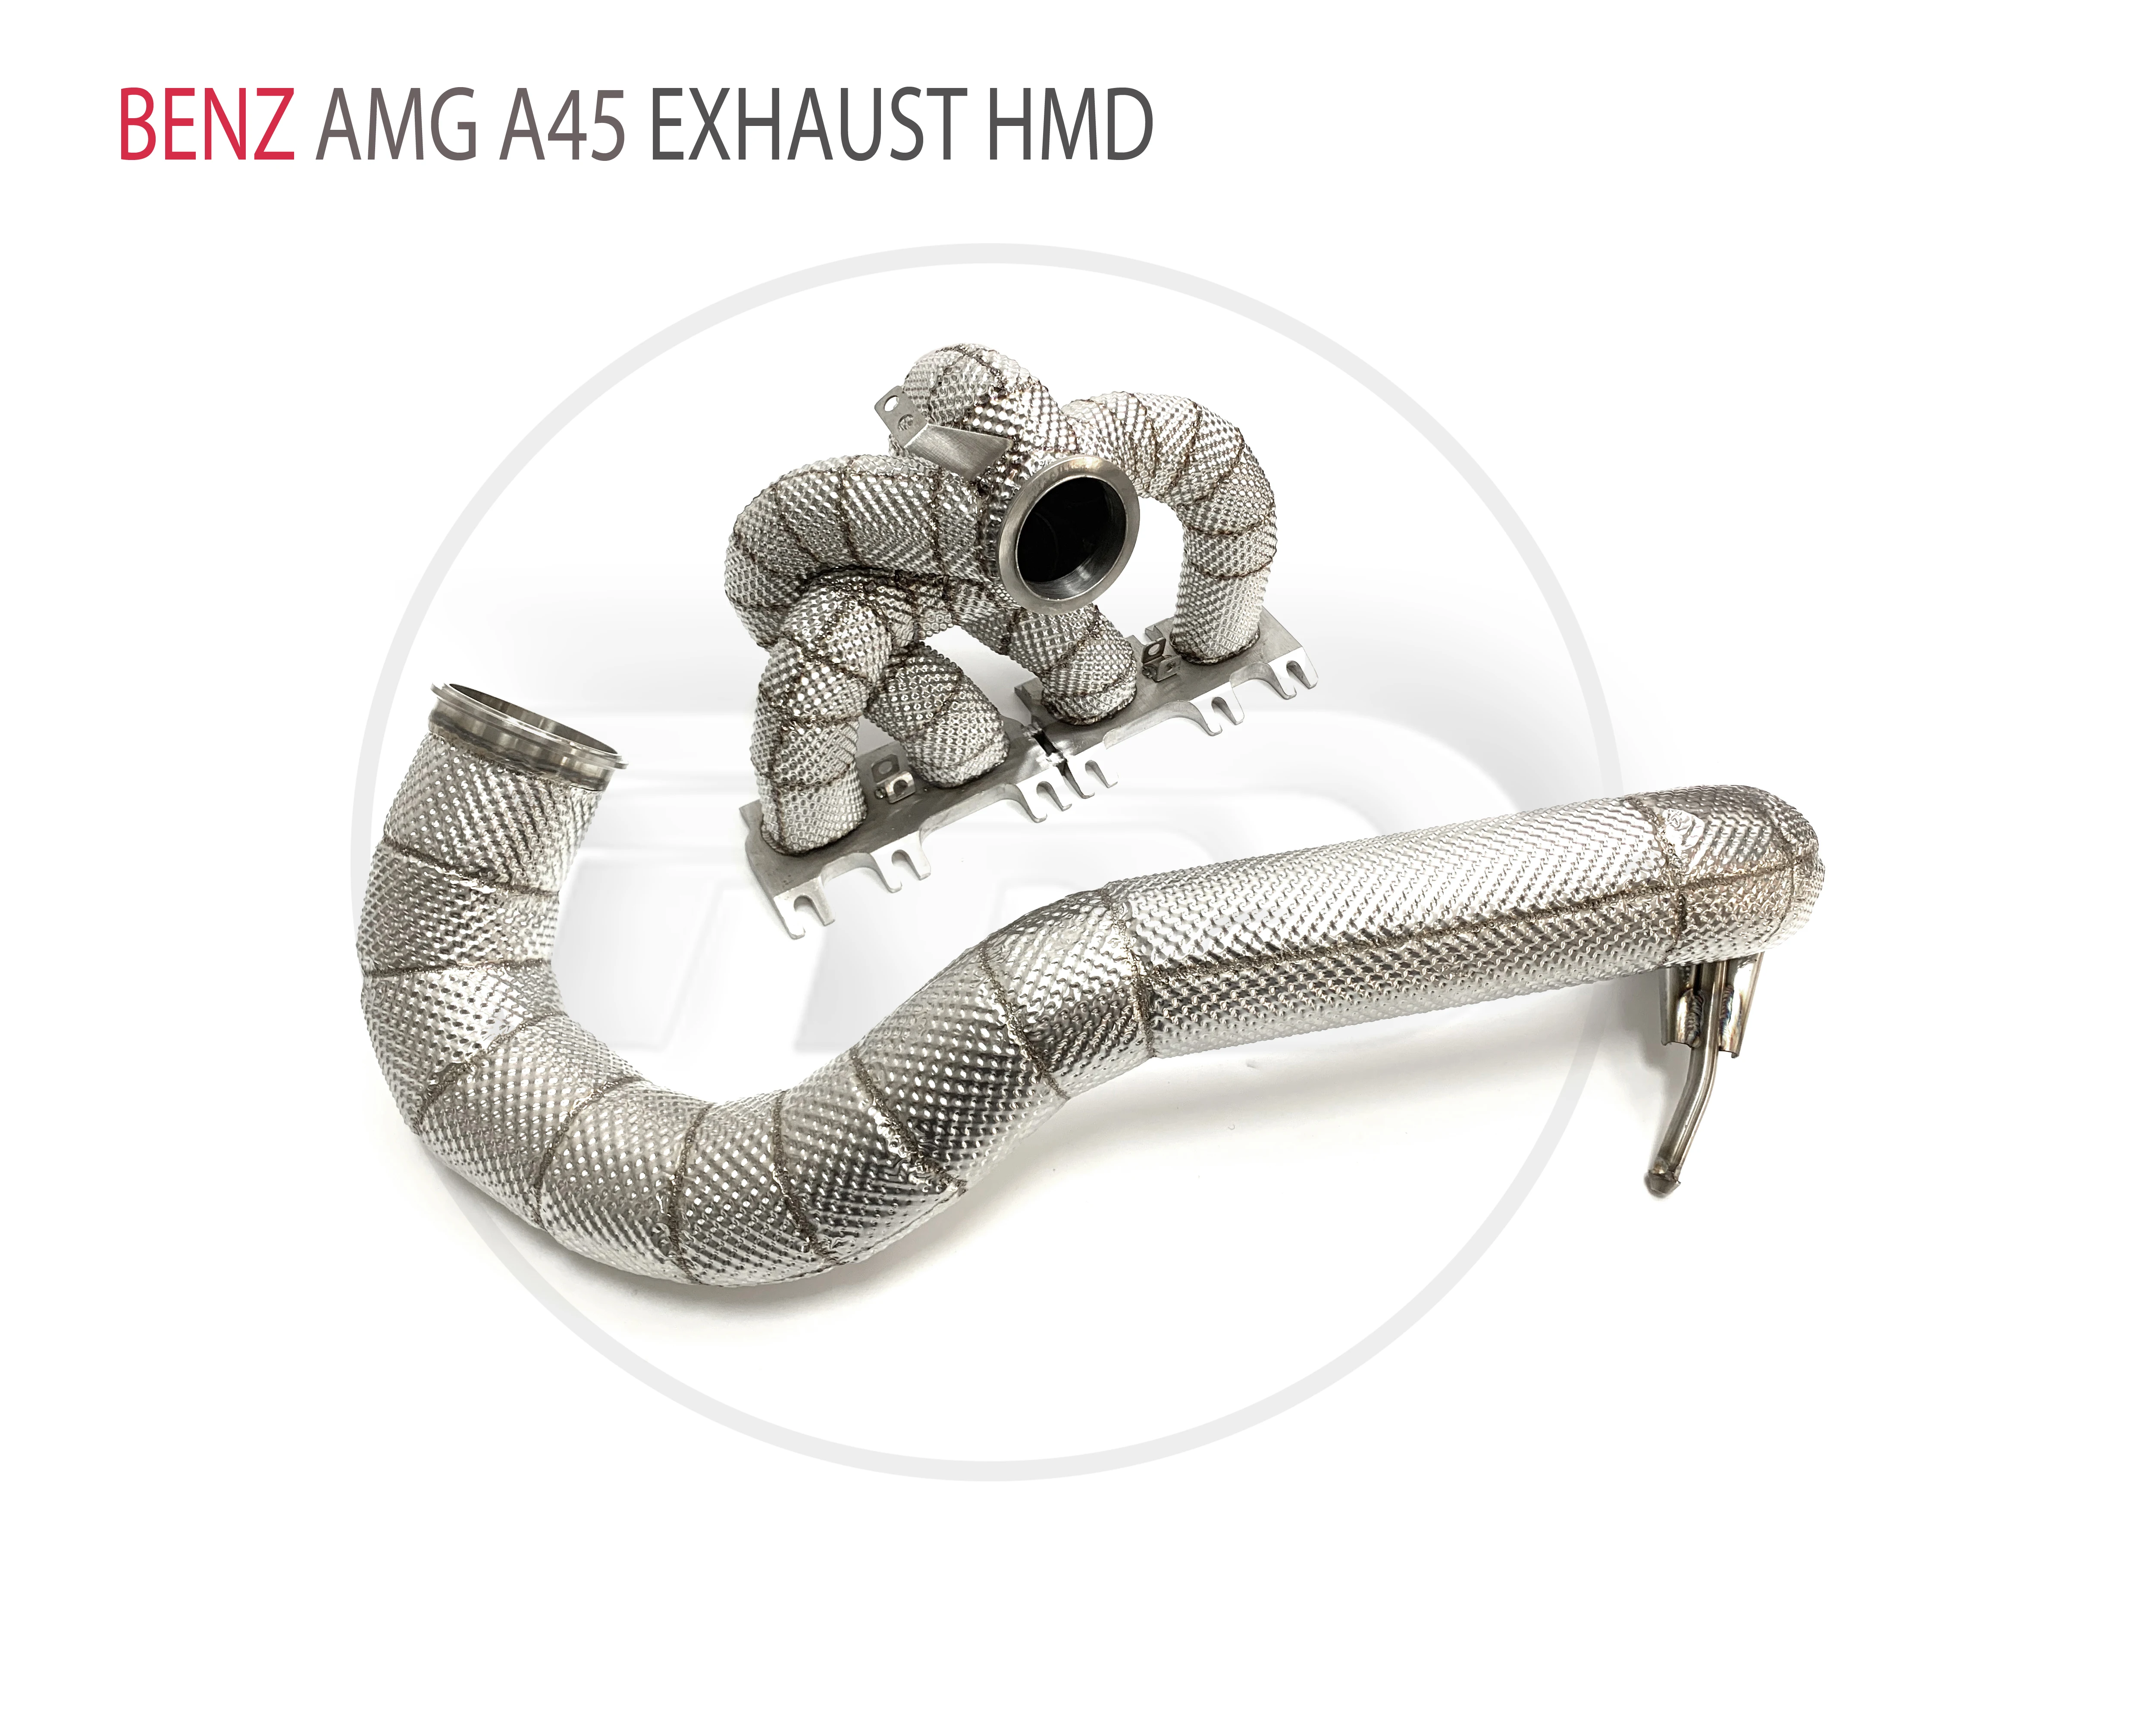 

HMD Exhaust Manifold Downpipe for Benz AMG A45 Car Accessories With Catalytic converter Header Without cat pipe